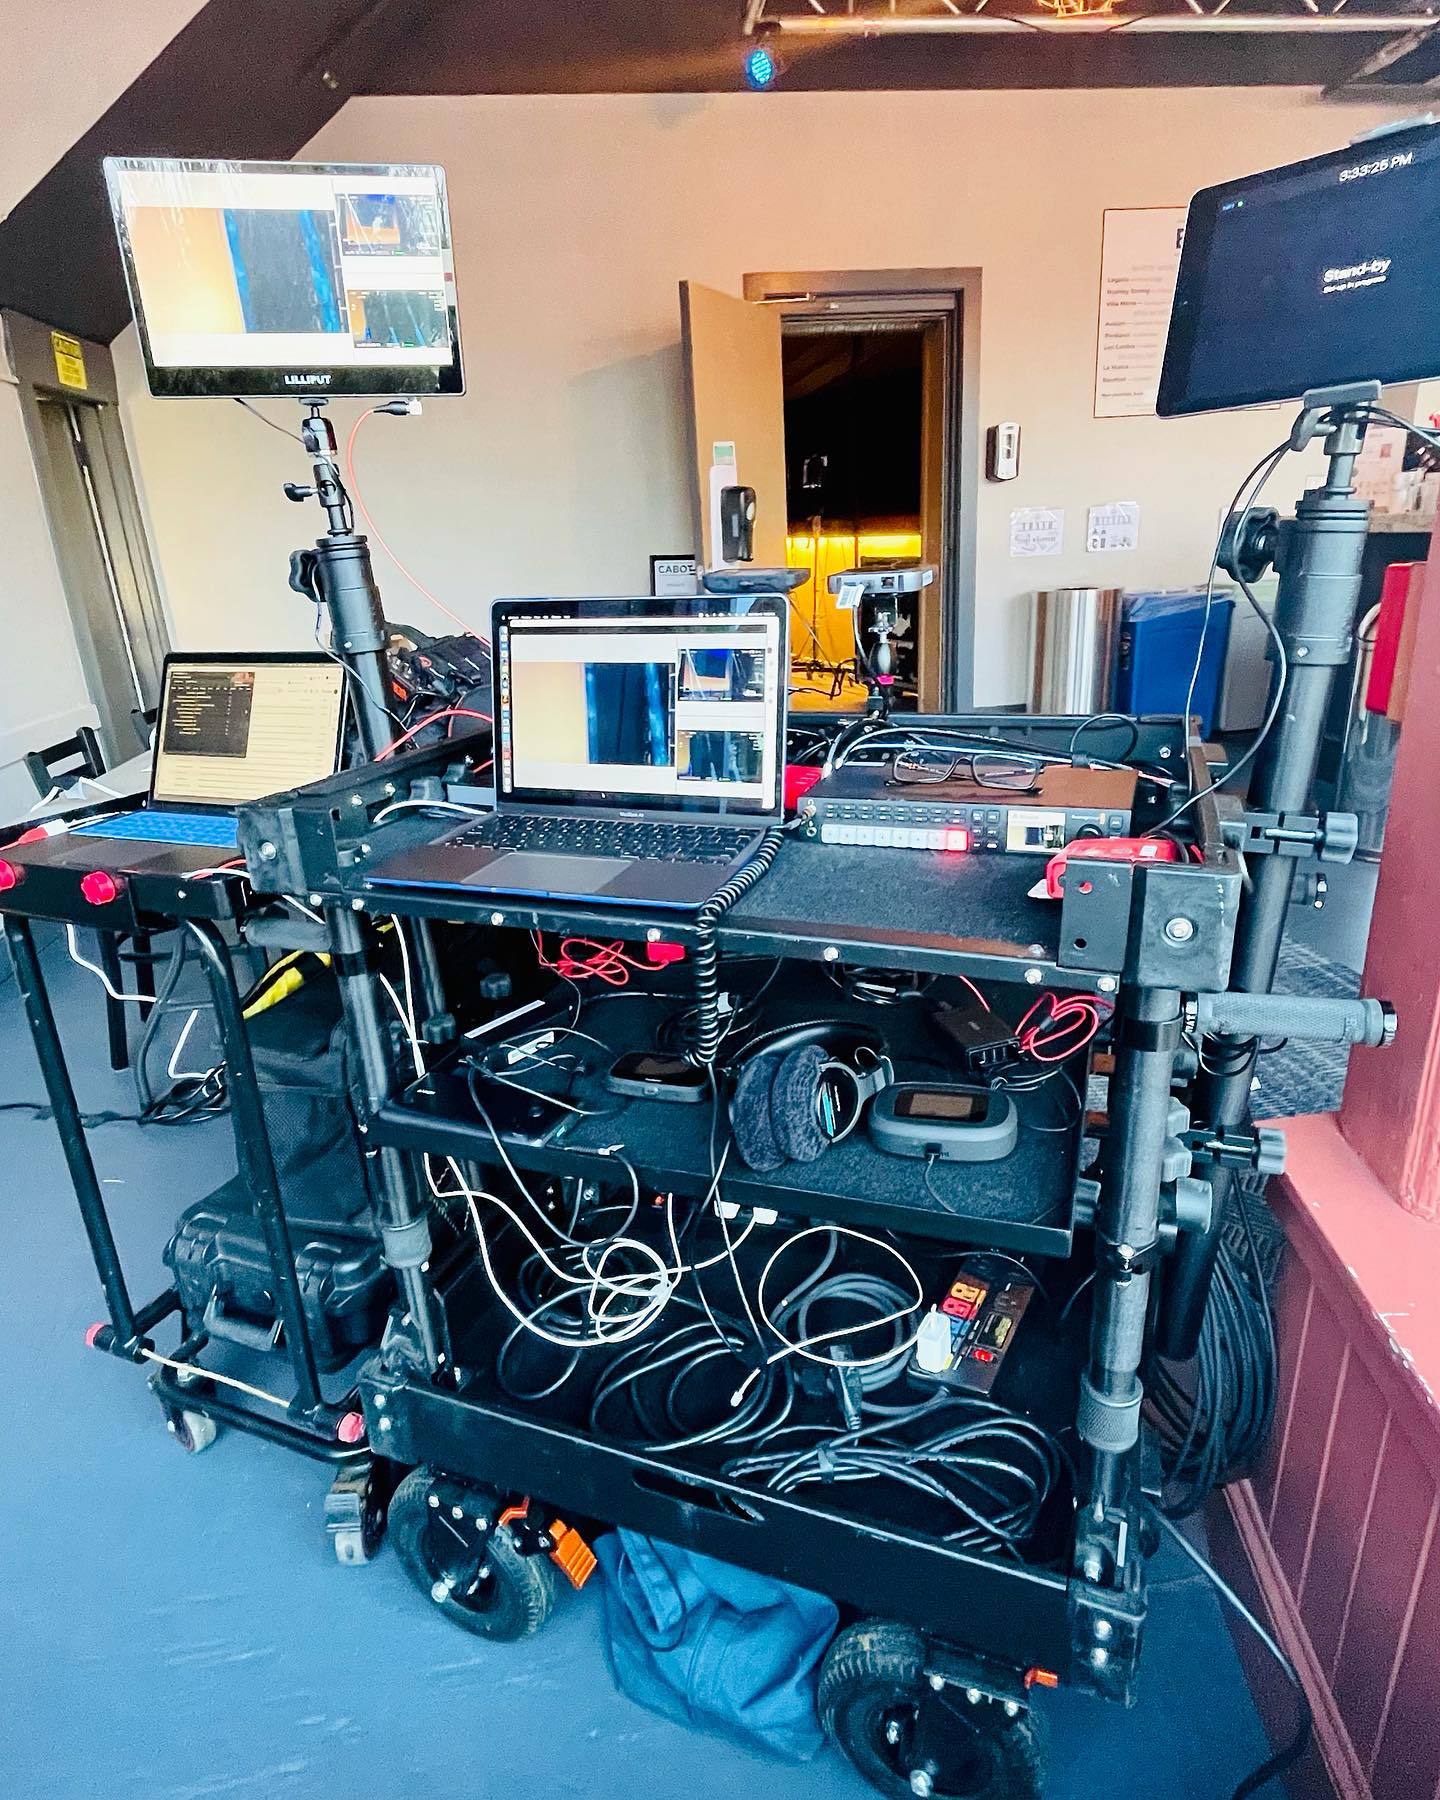 Remote zoom production streaming for a multi-camera shoot at the Cabot Theatre in Beverly, MA. Finishing off the year with some fun gigs. Can’t wait for what 2022 will bring?! #setlife #inovativcarts #mushroomnetworks #bondedinternet #blackmagicatem